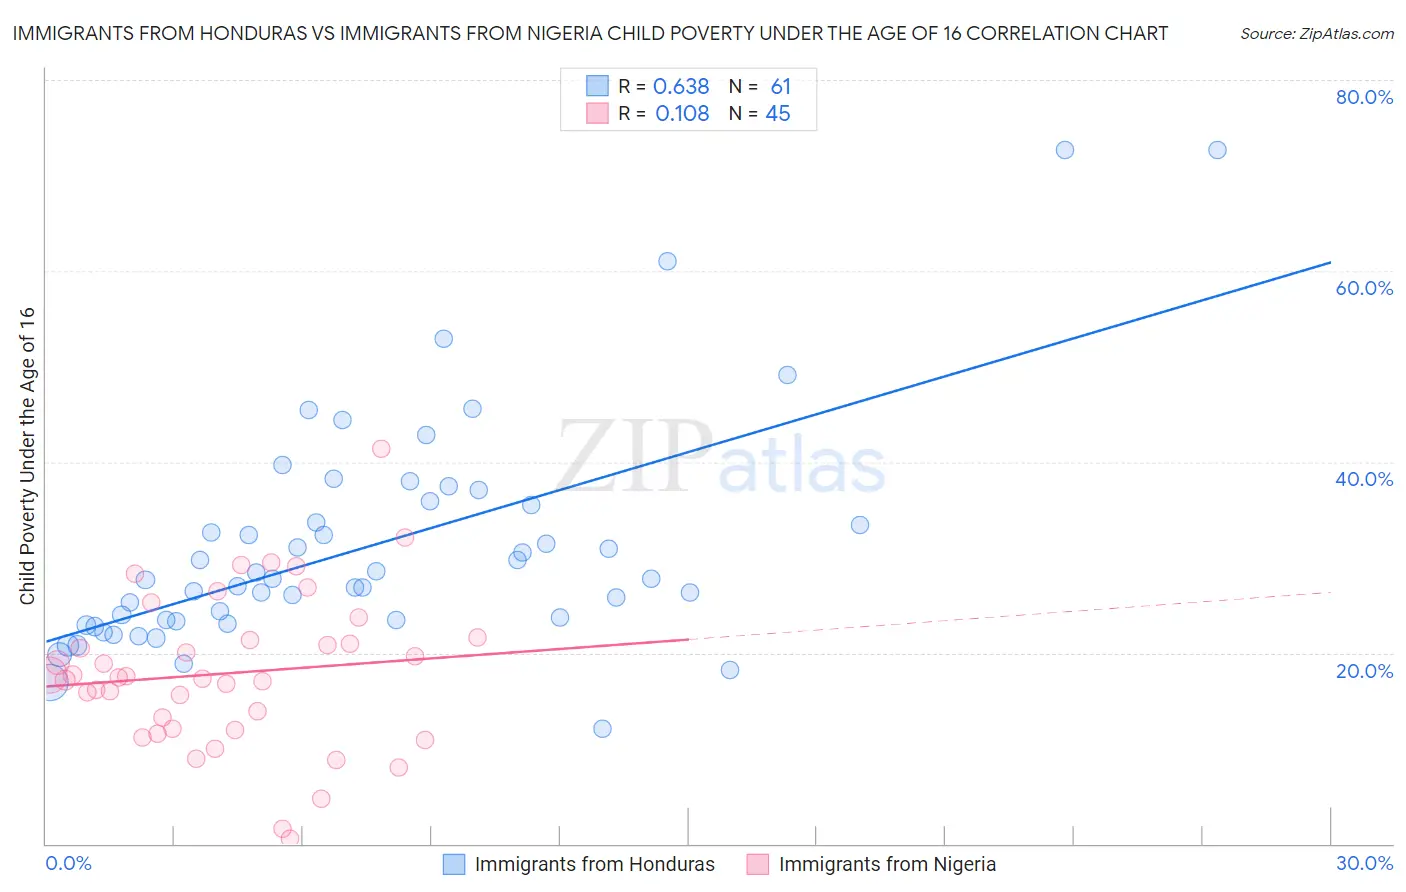 Immigrants from Honduras vs Immigrants from Nigeria Child Poverty Under the Age of 16